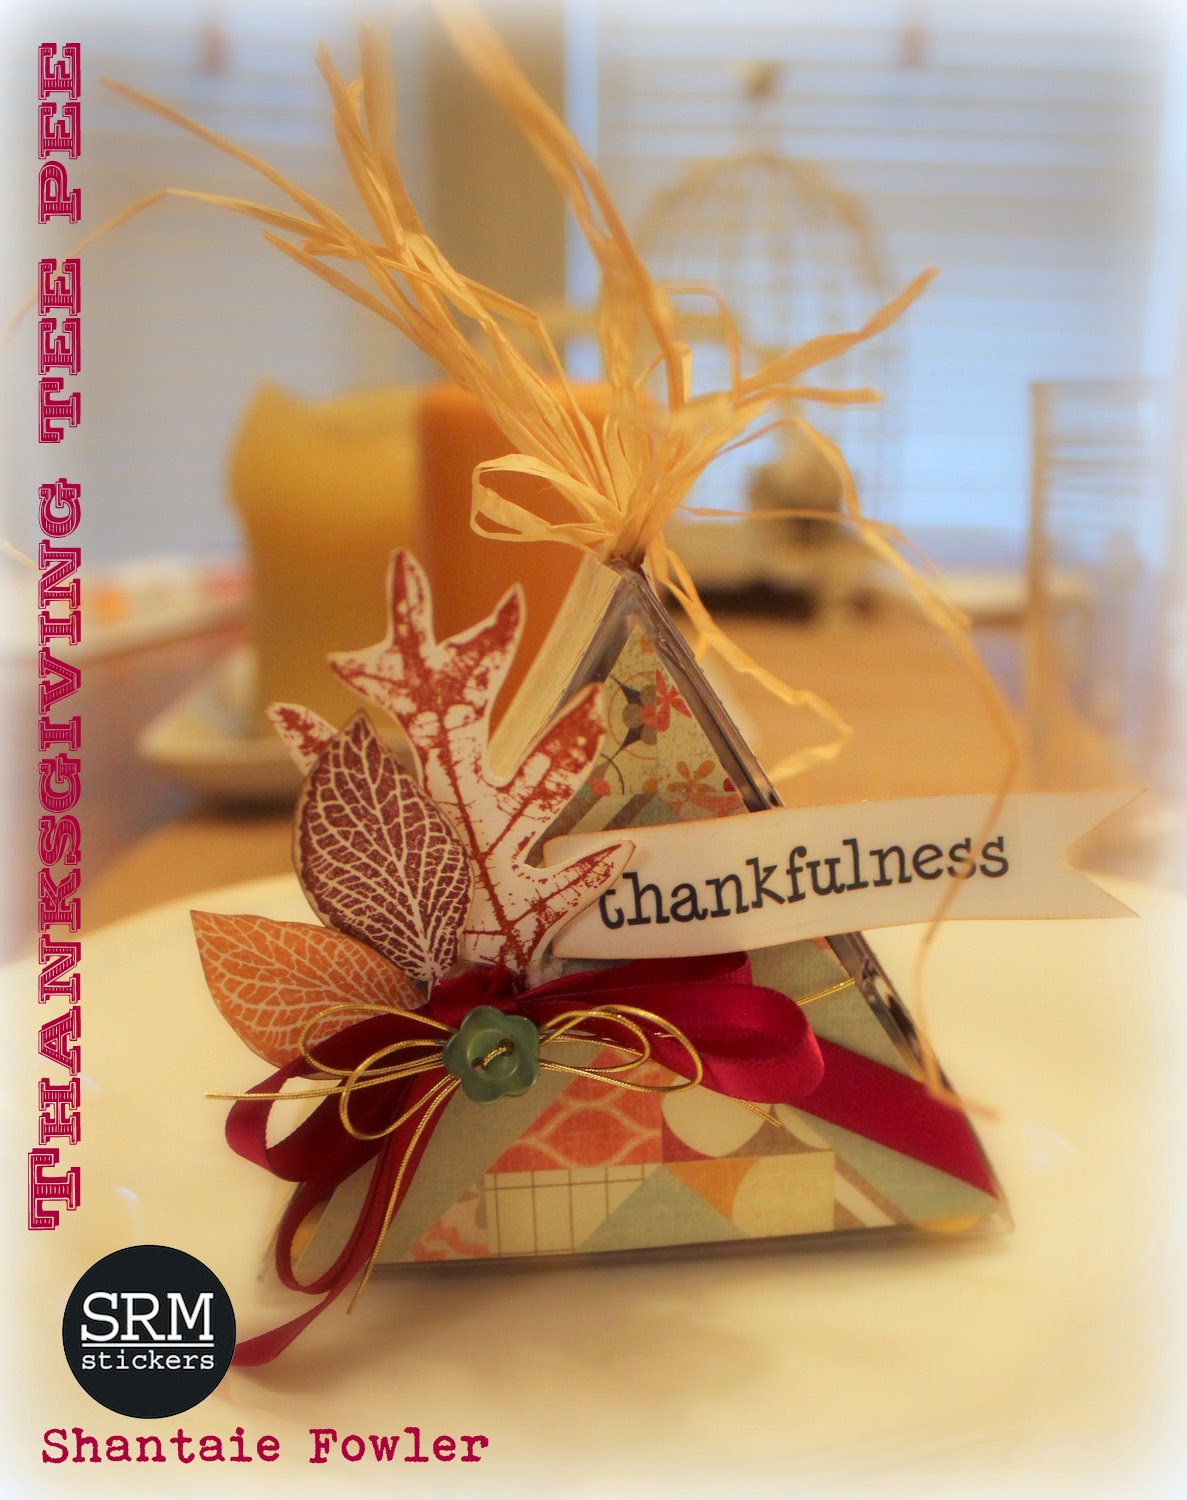 SRM Stickers - Thanksgiving Table Decor by Shantaie - #srmstickers #stickers #thanksgiving #trinagle #clear box